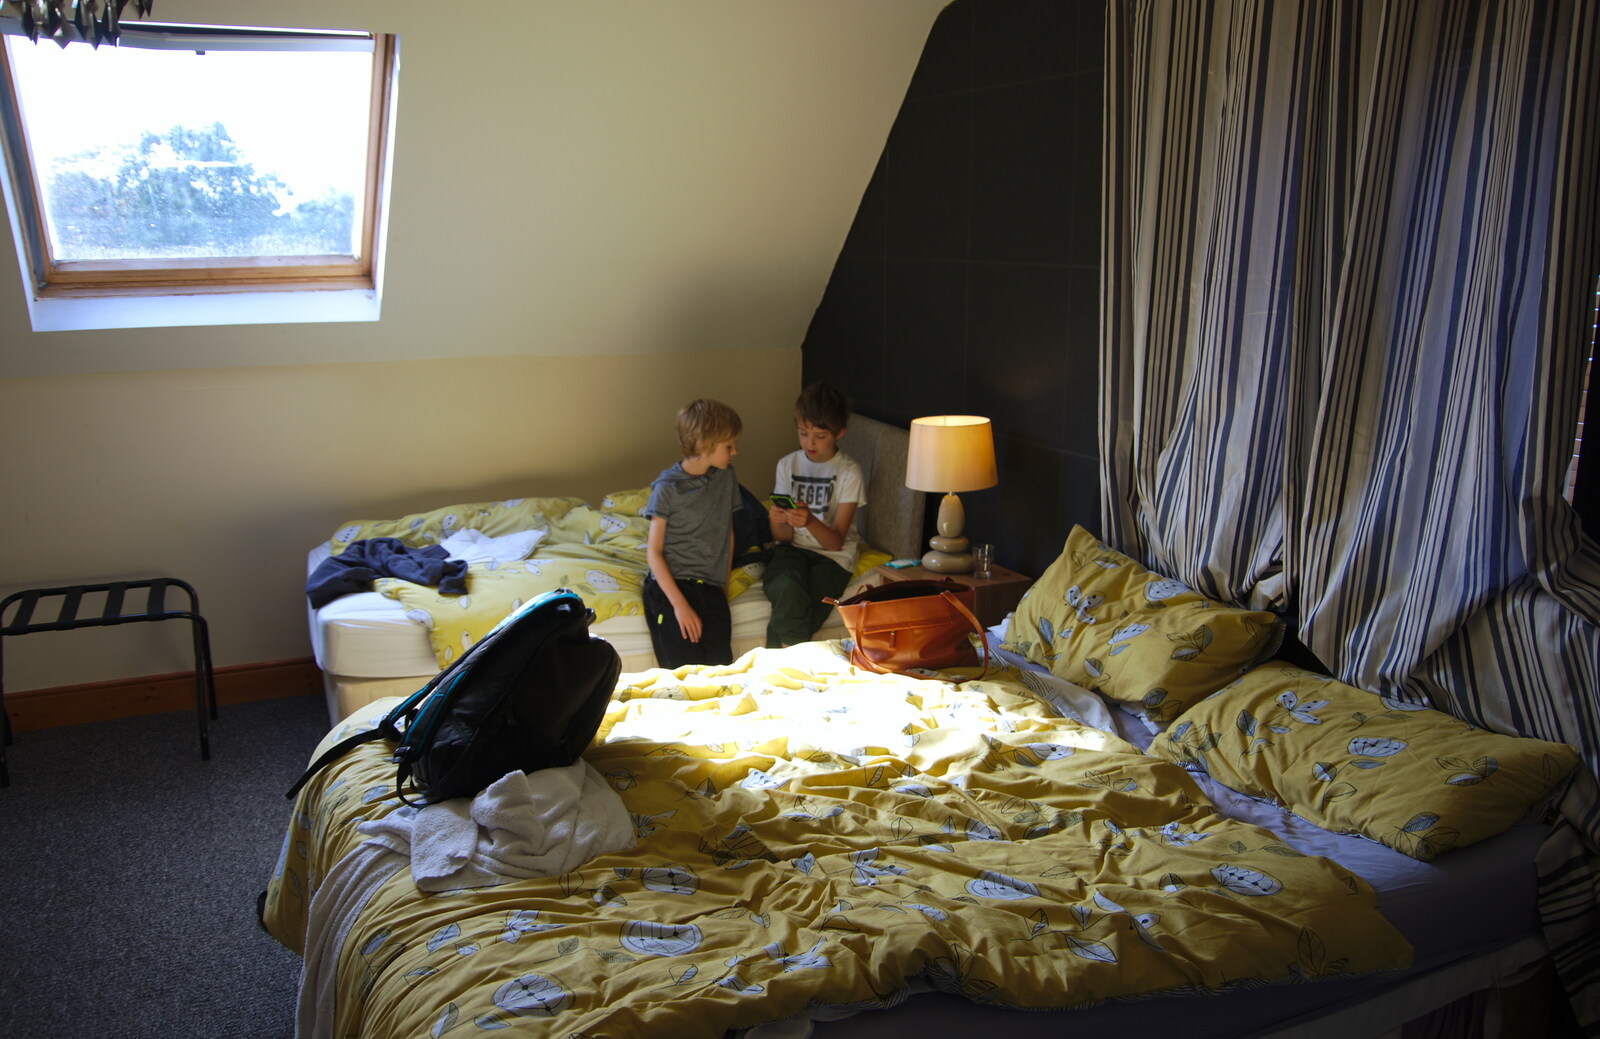 Harry and Fred in the B&B bedroom from A Day in Derry, County Londonderry, Northern Ireland - 15th August 2019